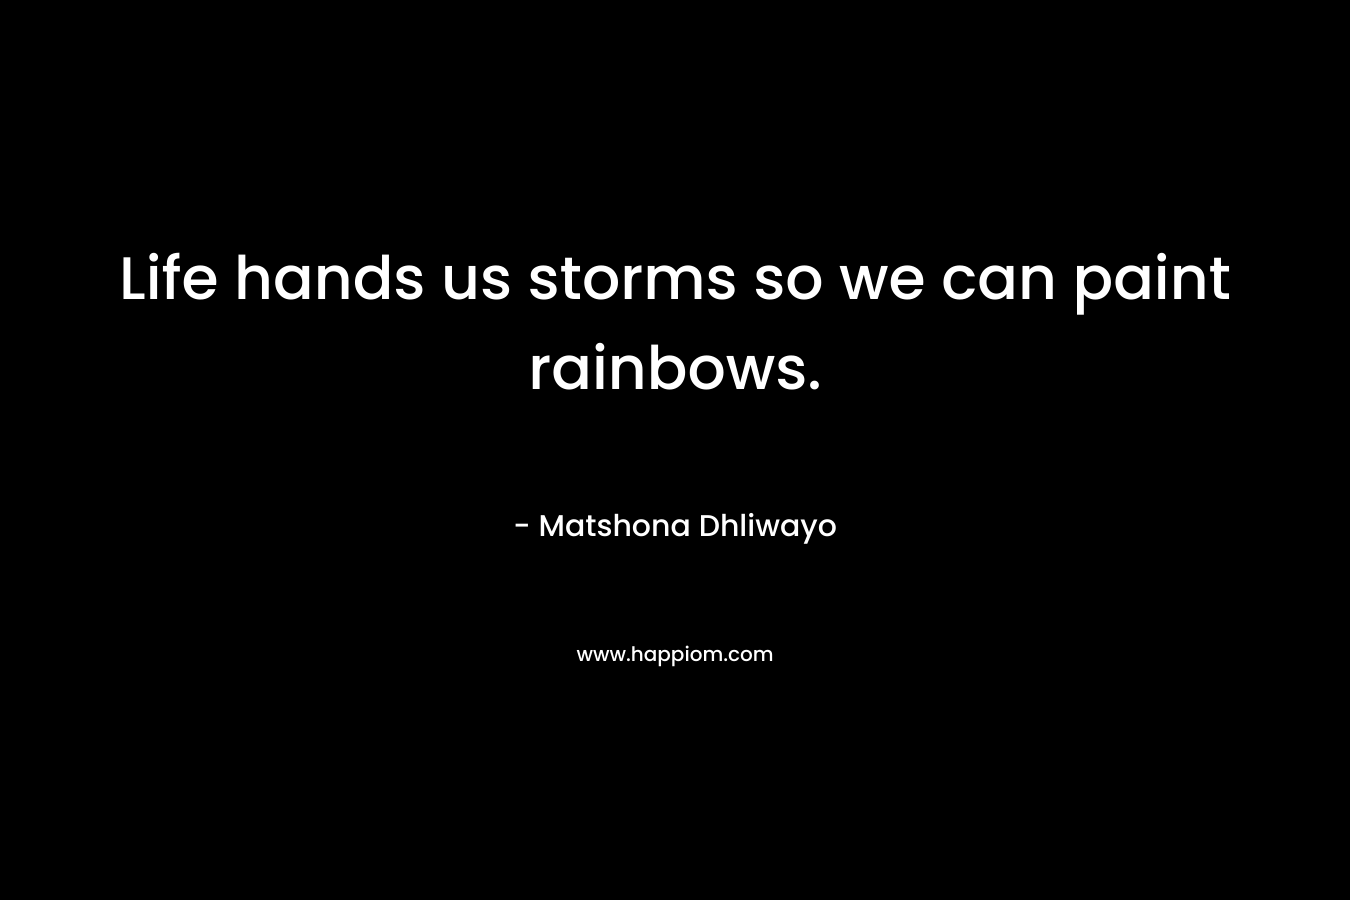 Life hands us storms so we can paint rainbows.